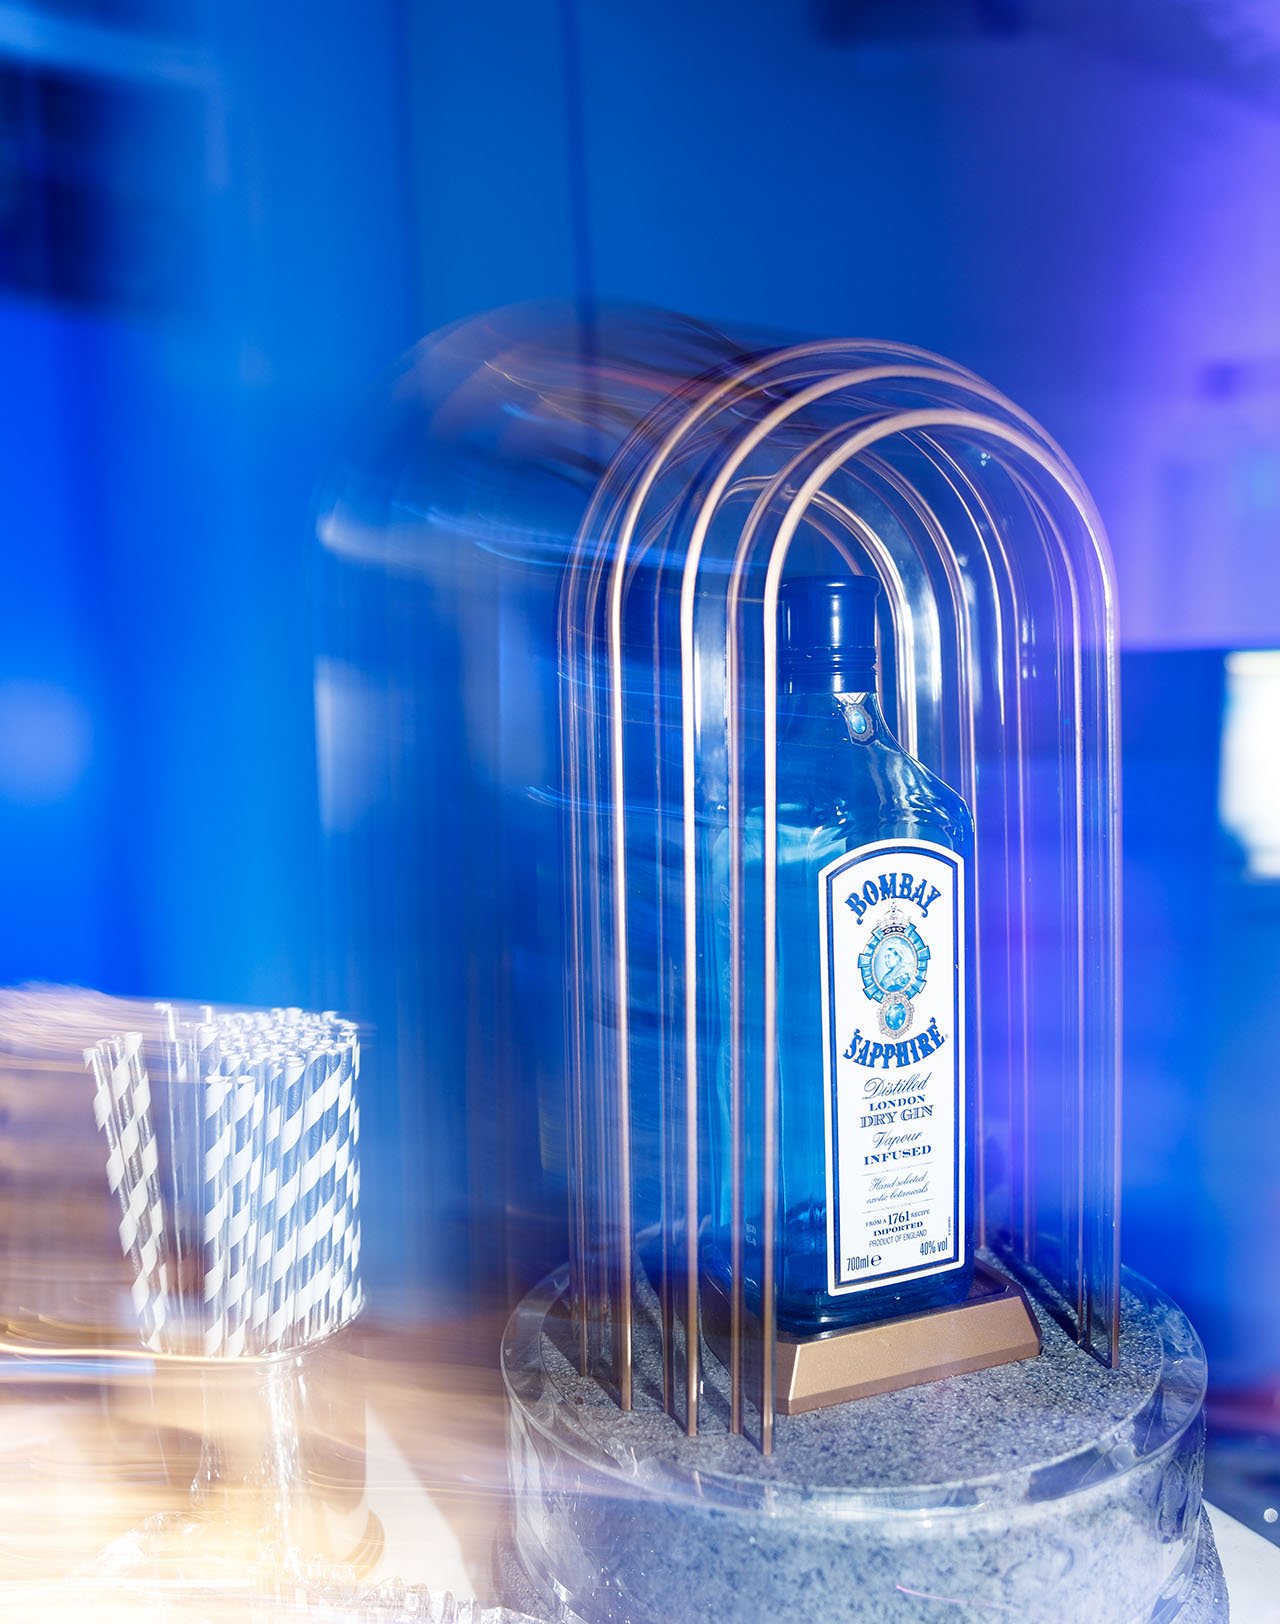 CANVAS event by Bombay Sapphire, Athens, January 2019. Photo by Spyros Chamalis © Yatzer 2019.